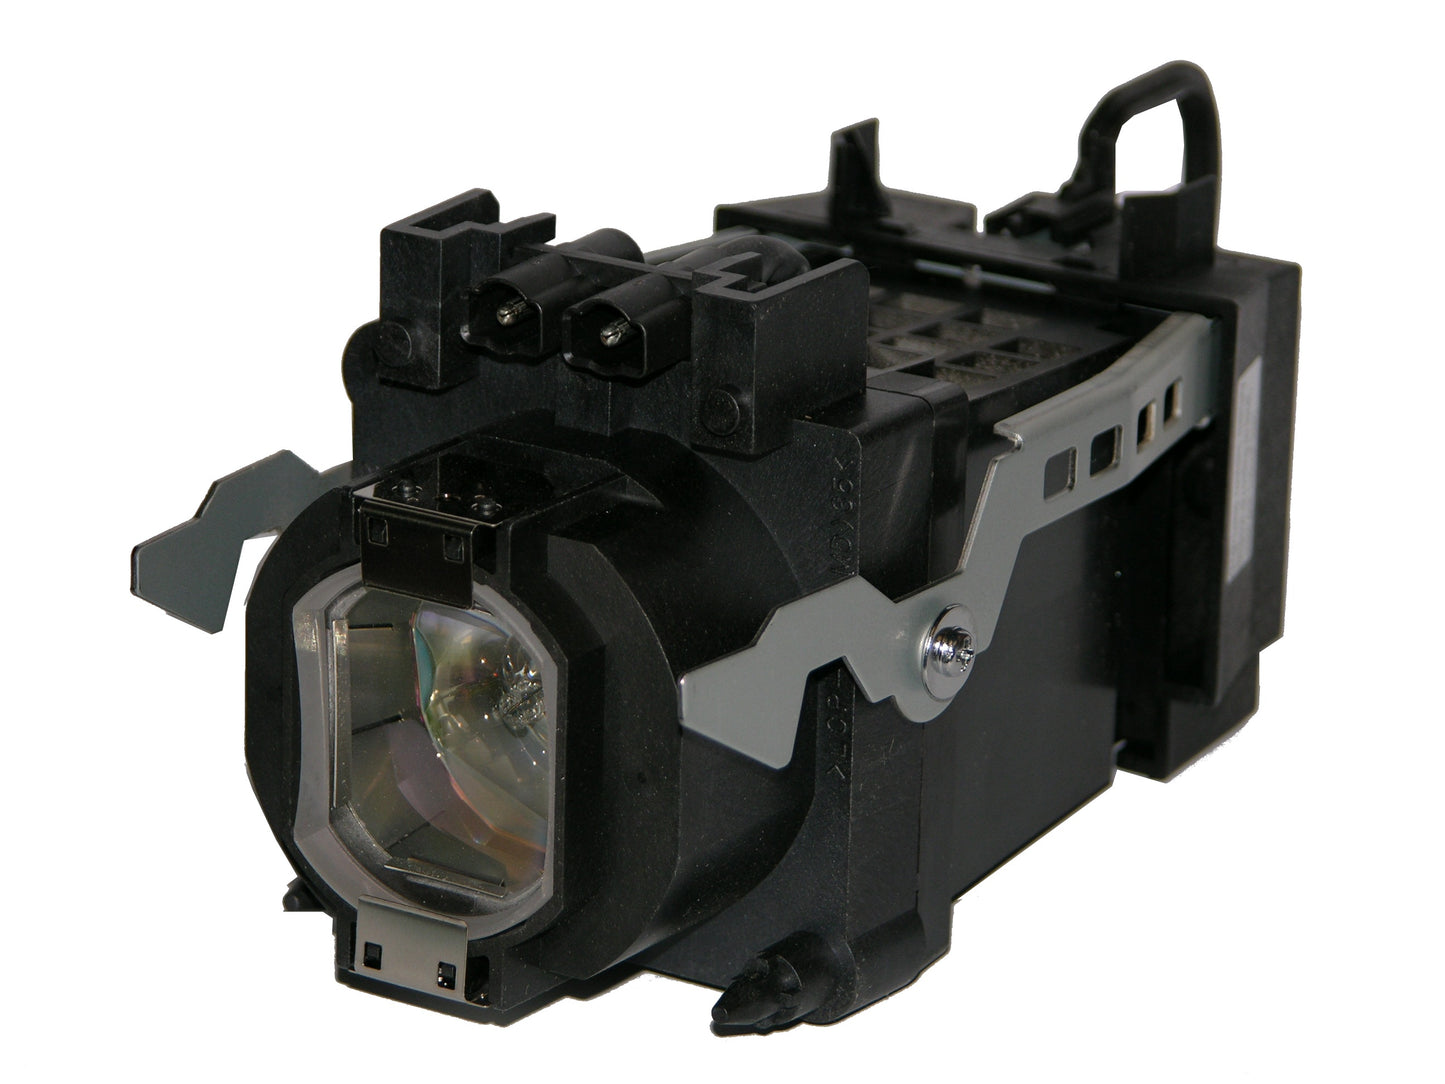 Neolux DLP Lamp/Bulb/Housing for Sony F-9308-750-0, XL-2400U, with Neolux Lamp, Made by Osram